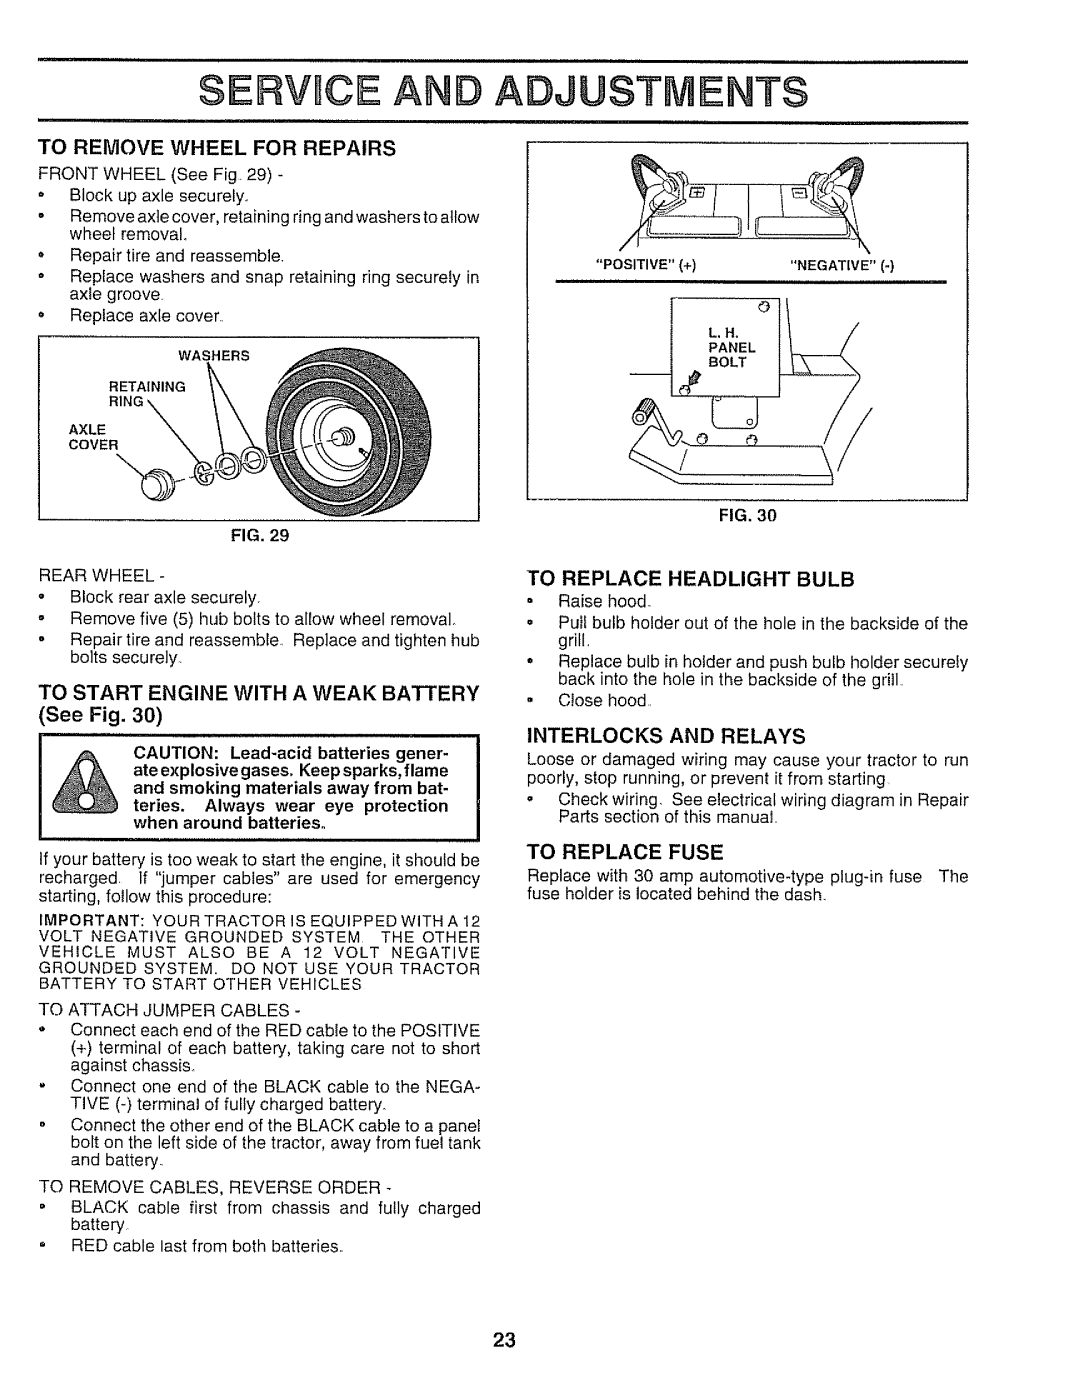 Sears 917.250551 manual Service And Adjustments, To Start Engine With A Weak Battery, See Fig, To Remove Wheel For Repairs 